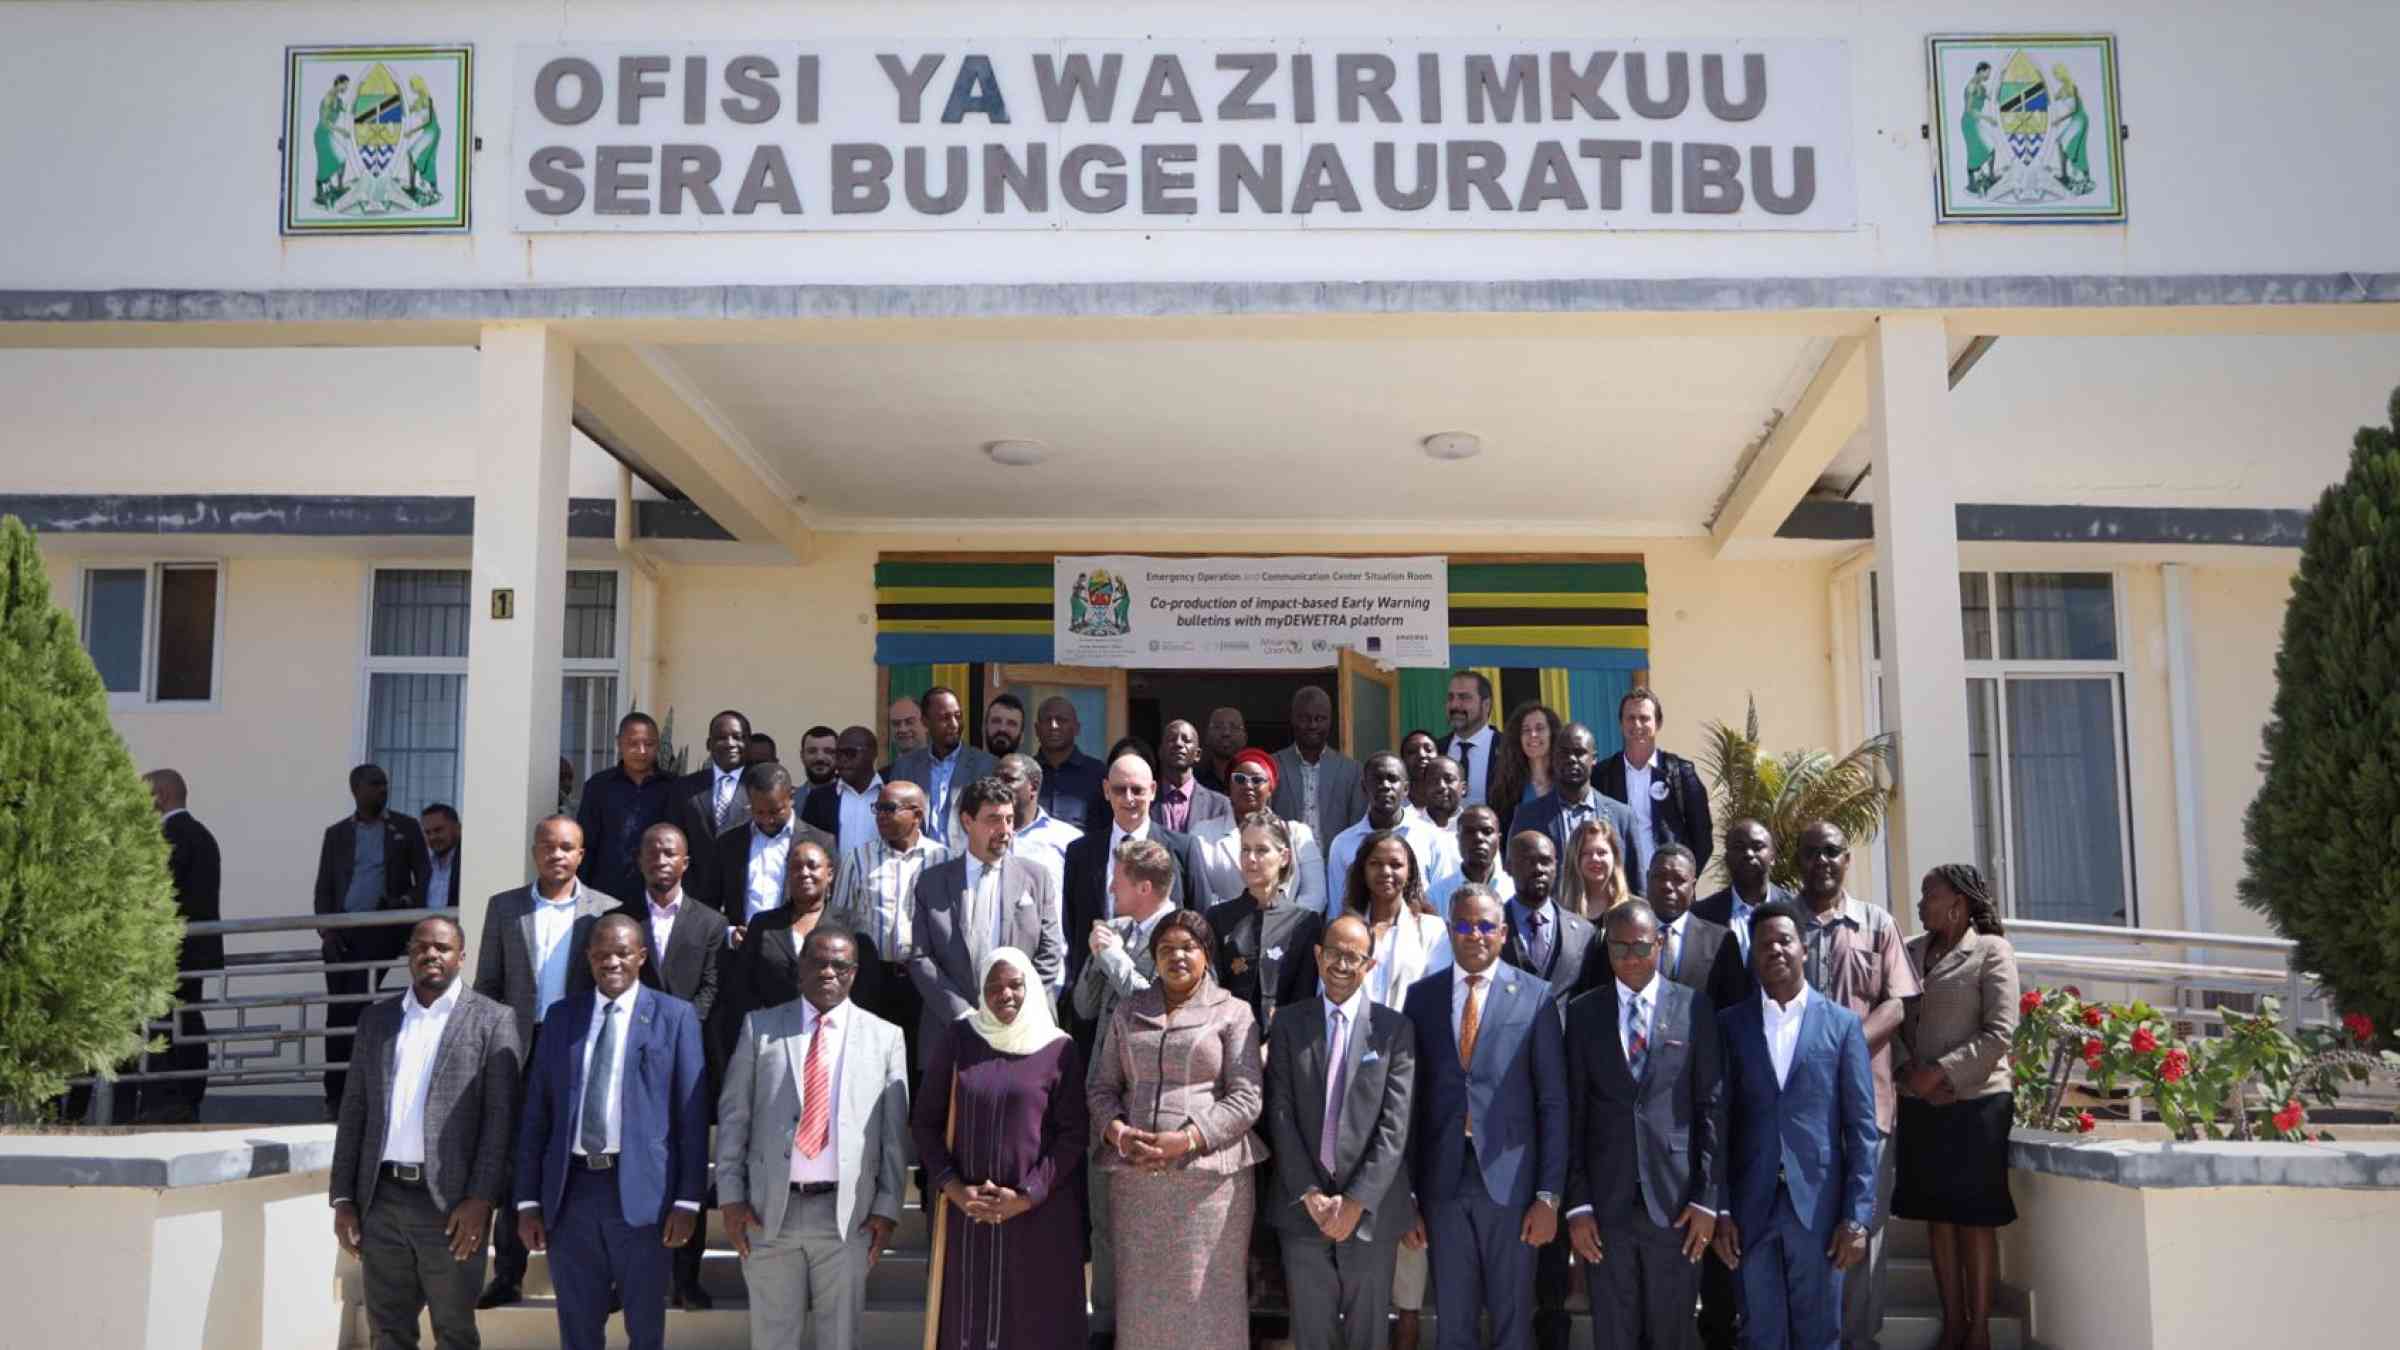 Inauguration of Tanzania’s ‘Emergency Operation and Communication Center’ Situation Room